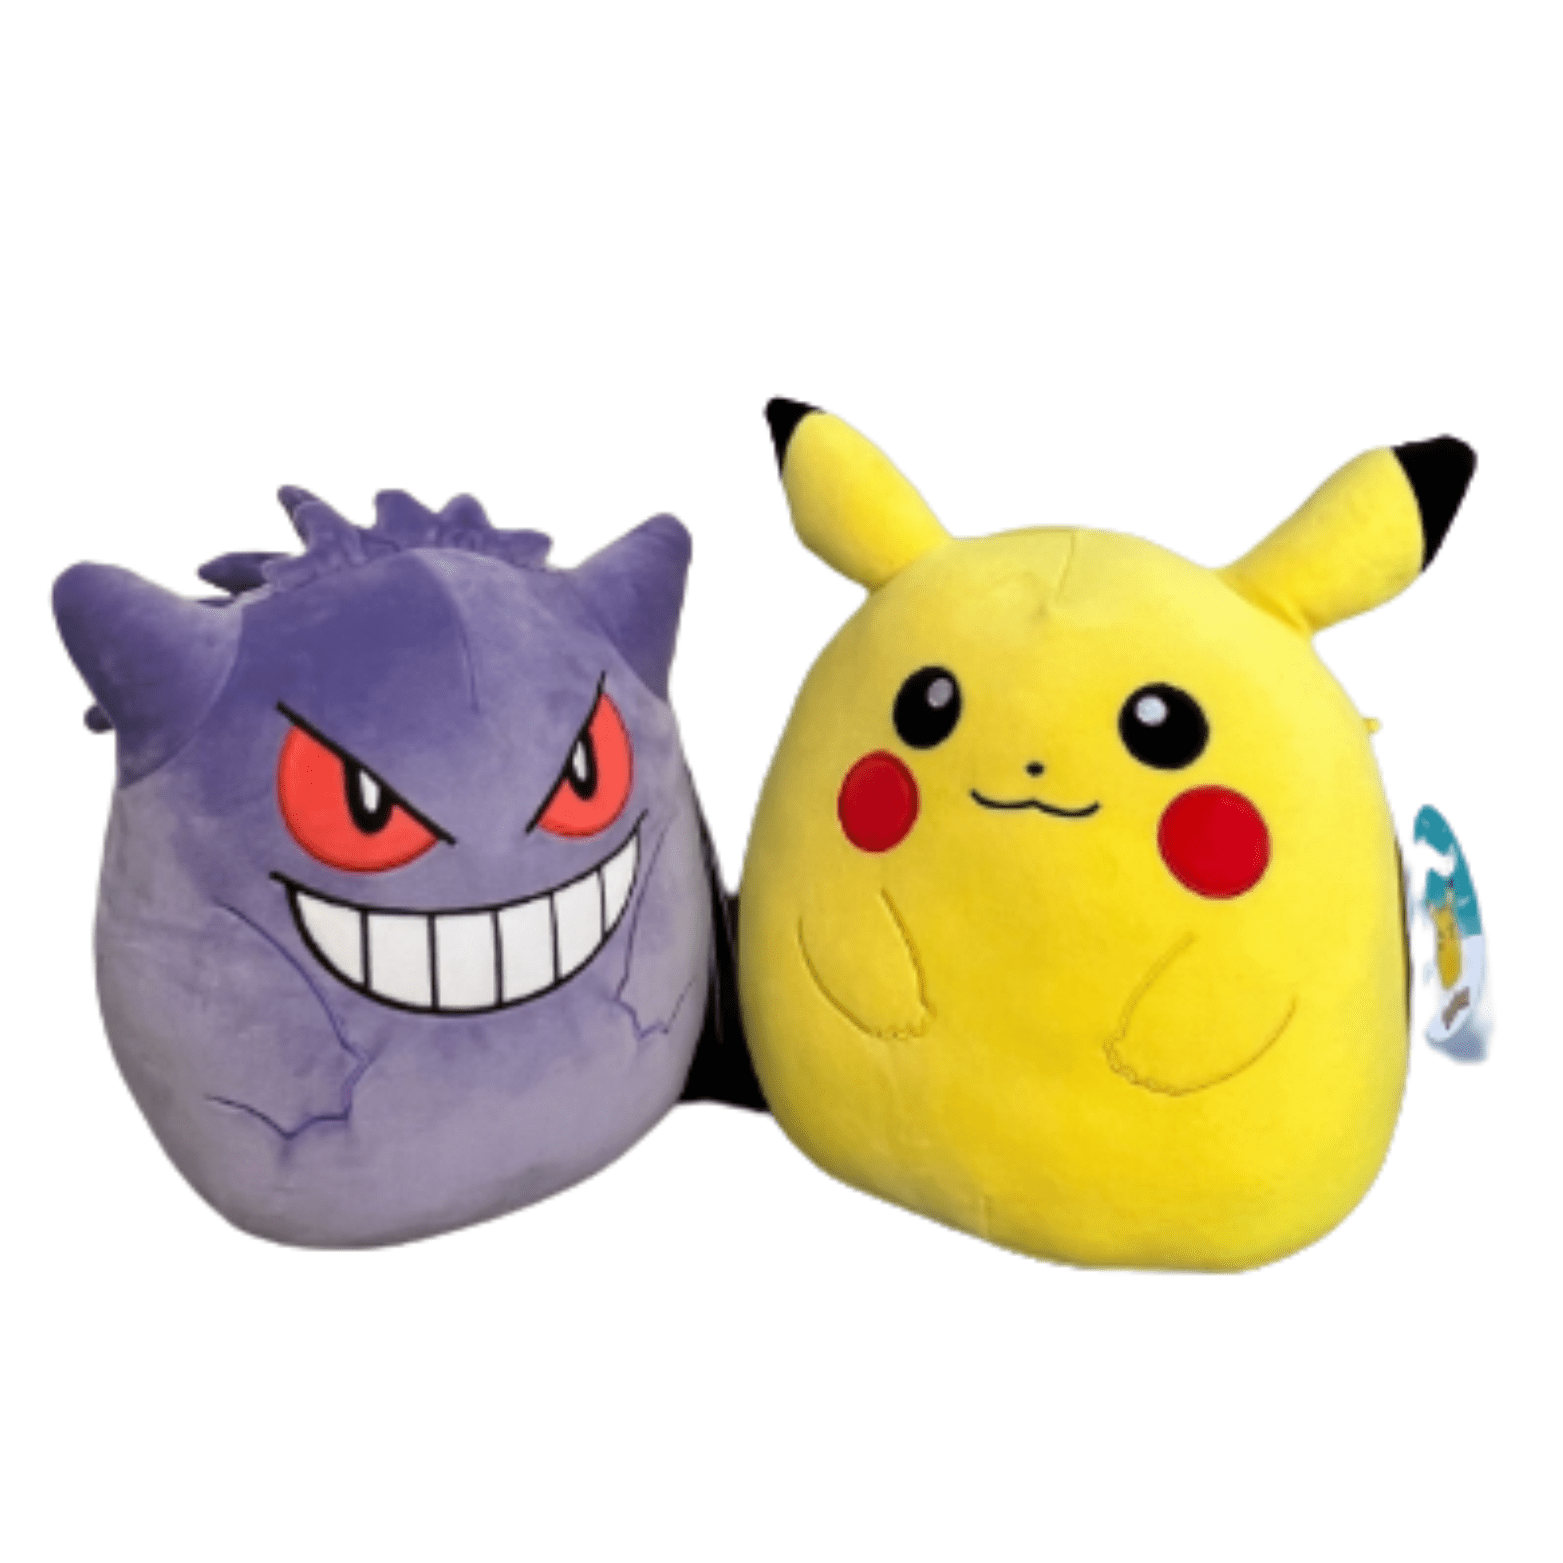 Squishmallows Official Kellytoys Plush 10 Inch Pokemon Pikachu and Gengar  Limited Edition 2023 Super Soft Animal Plush Stuffed Toy